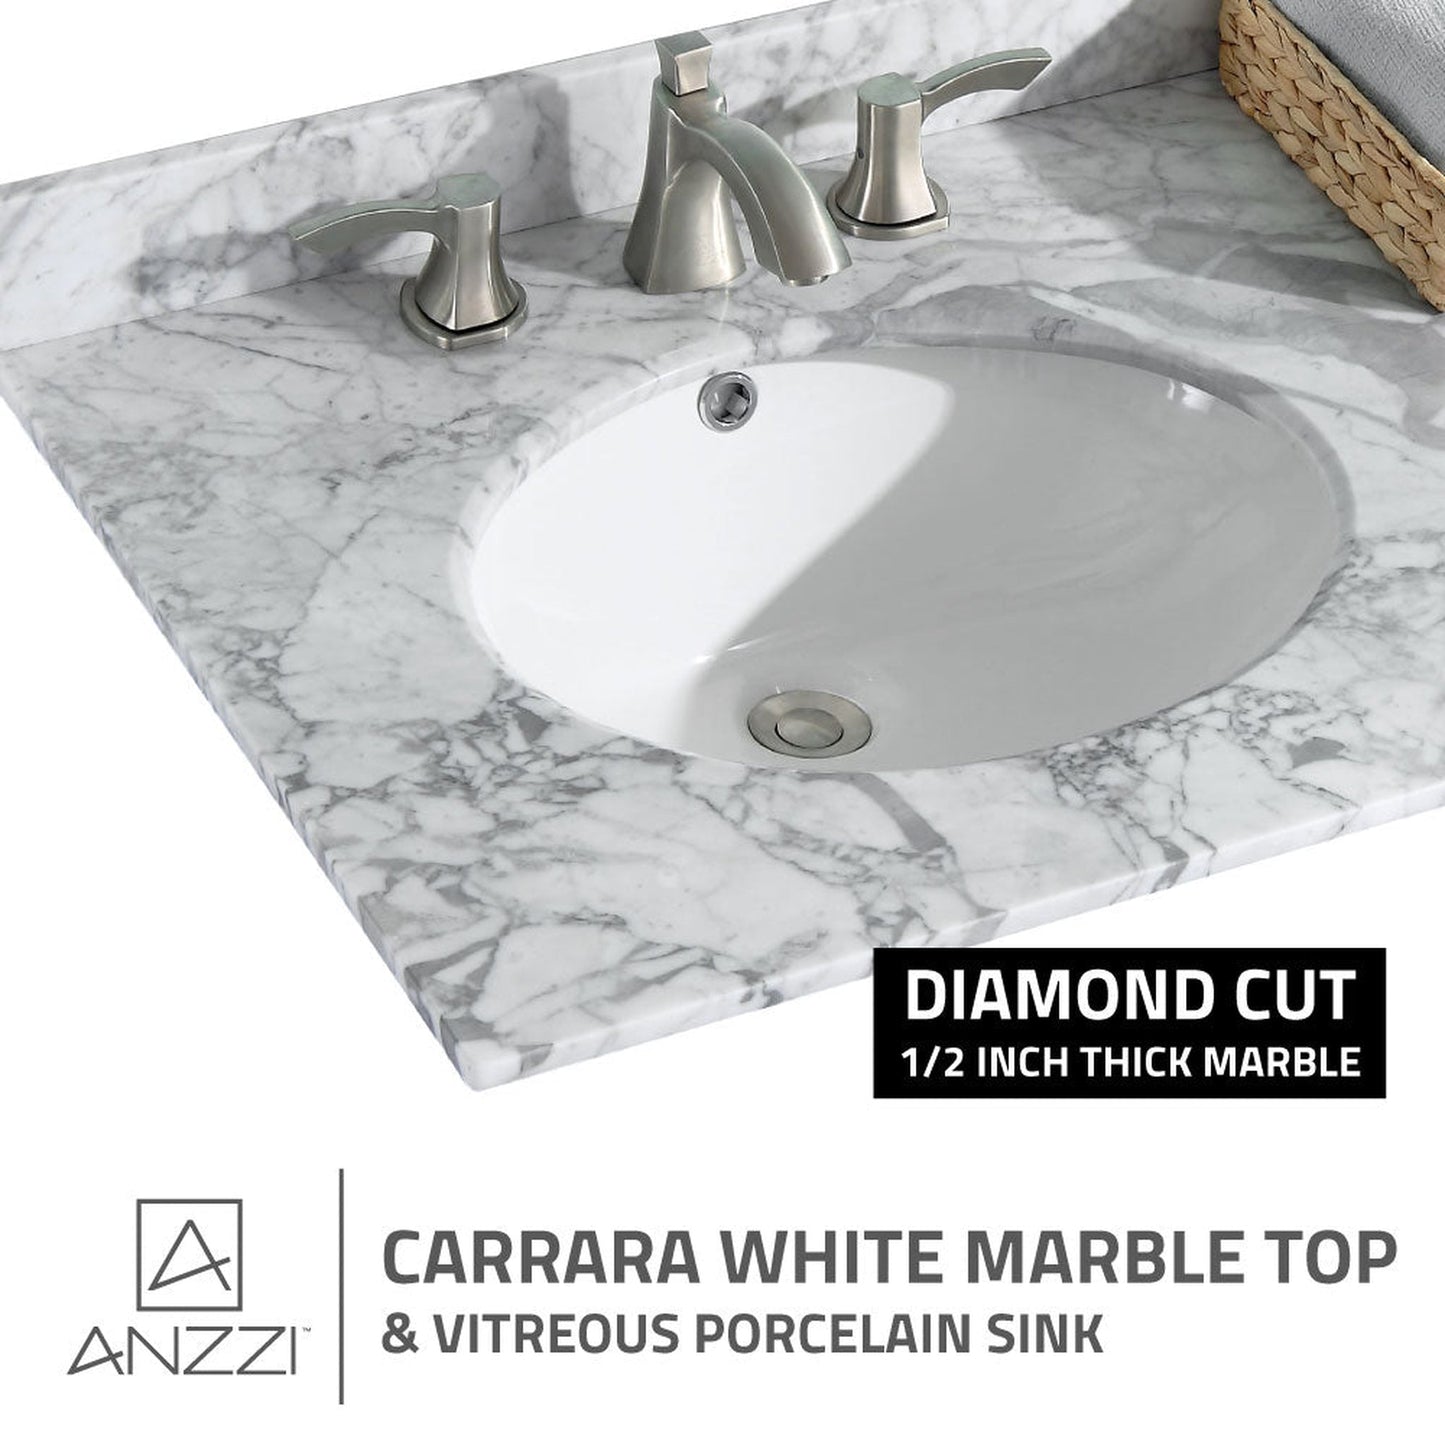 ANZZI Chateau Series 36" x 35" Rich Gray Solid Wood Bathroom Vanity With White Carrara Marble Countertop, Basin Sink and Mirror